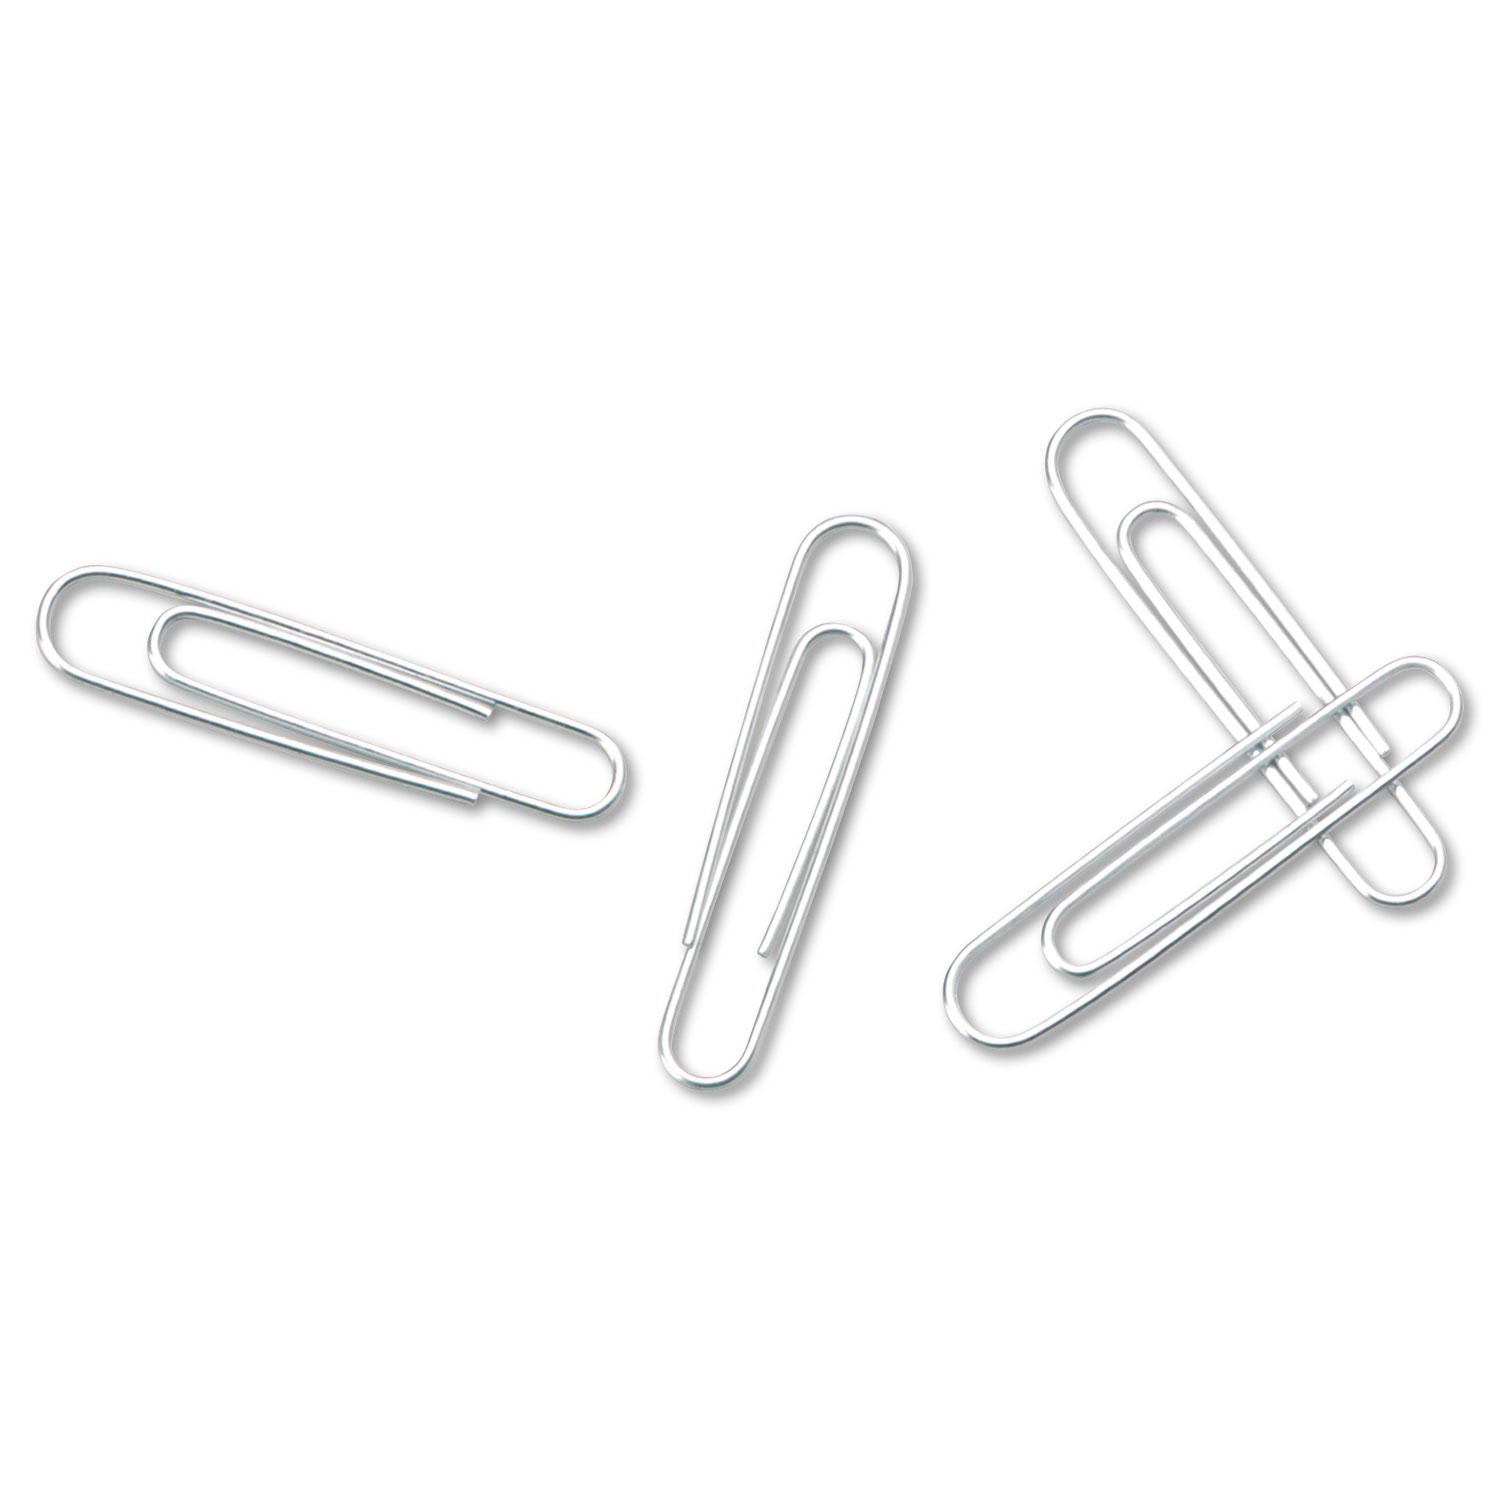 Smooth Standard Paper Clip, Jumbo, Silver, 100/Box, 10 Boxes/Pack